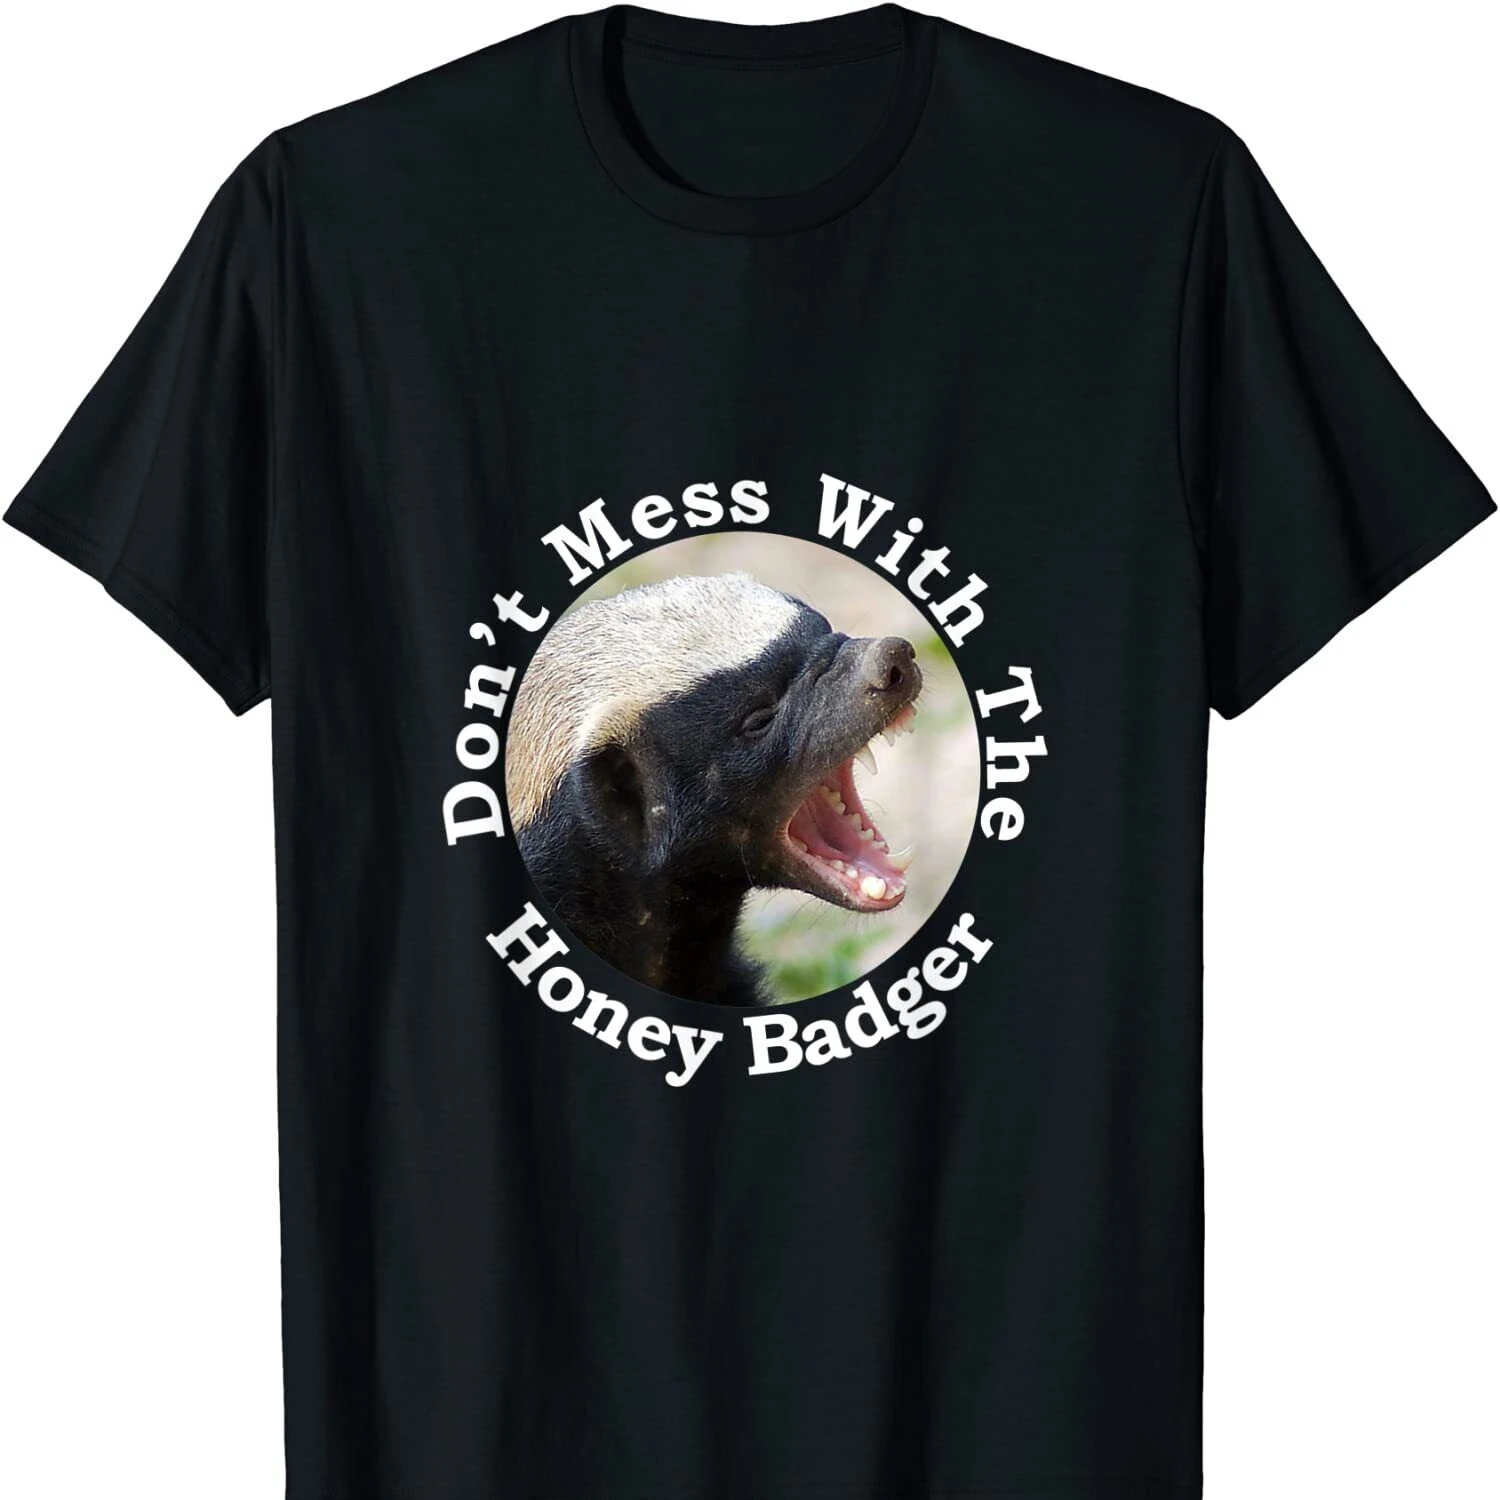 

Don't Mess with The Honey Badger T Shirt New 100% Cotton Short Sleeve O-Neck T-shirt Casual Mens Top